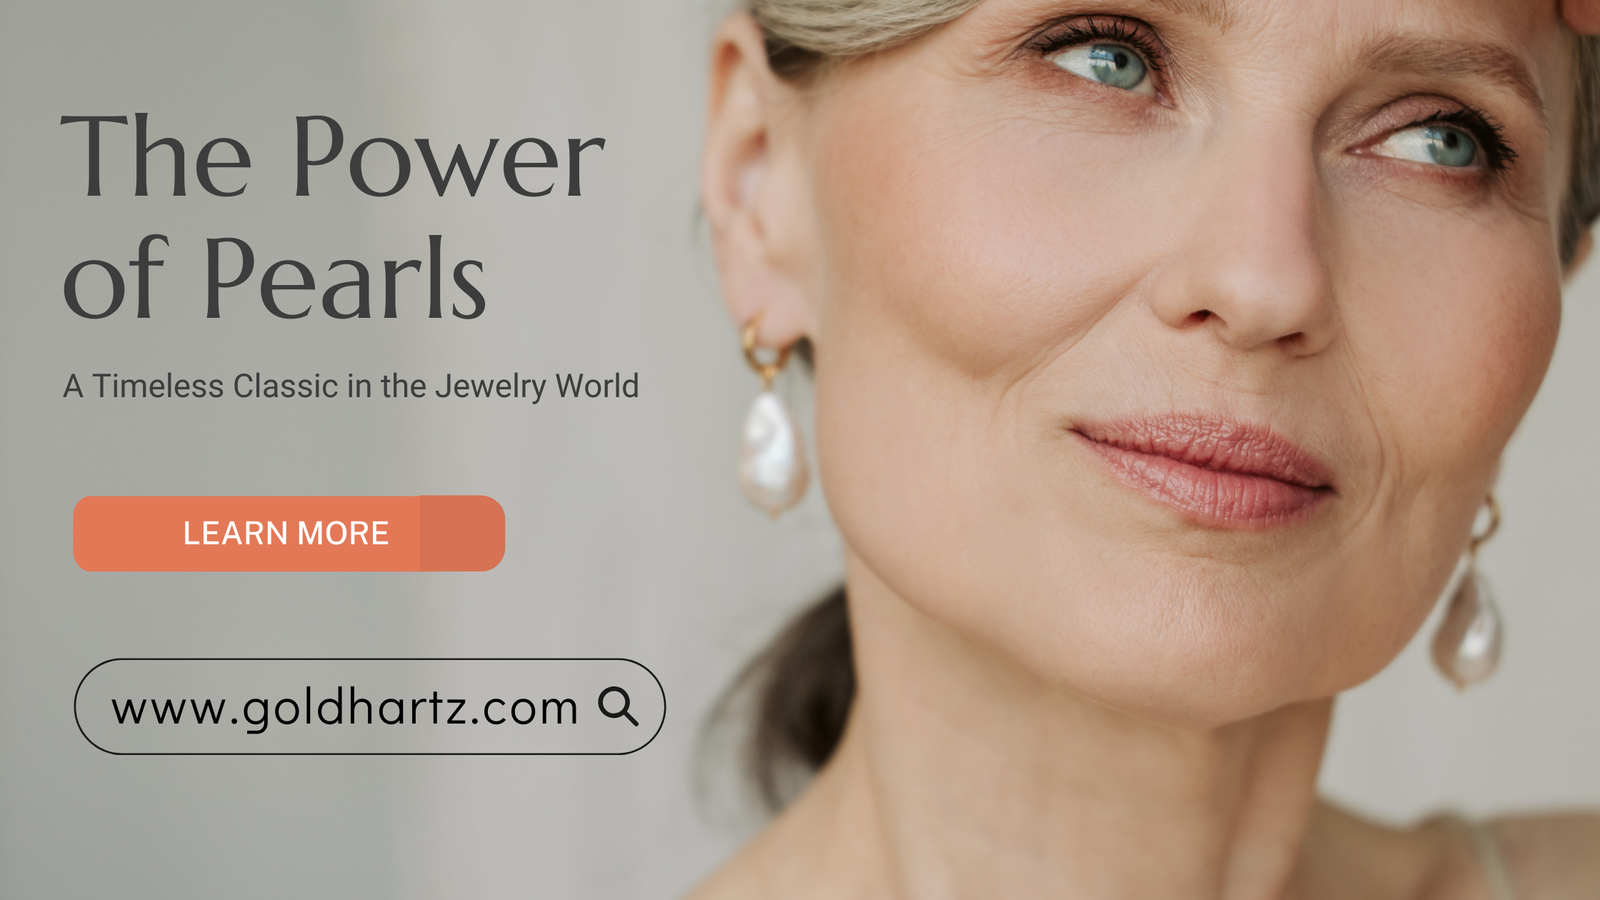 The Power of Pearls A Timeless Classic in the Jewelry World